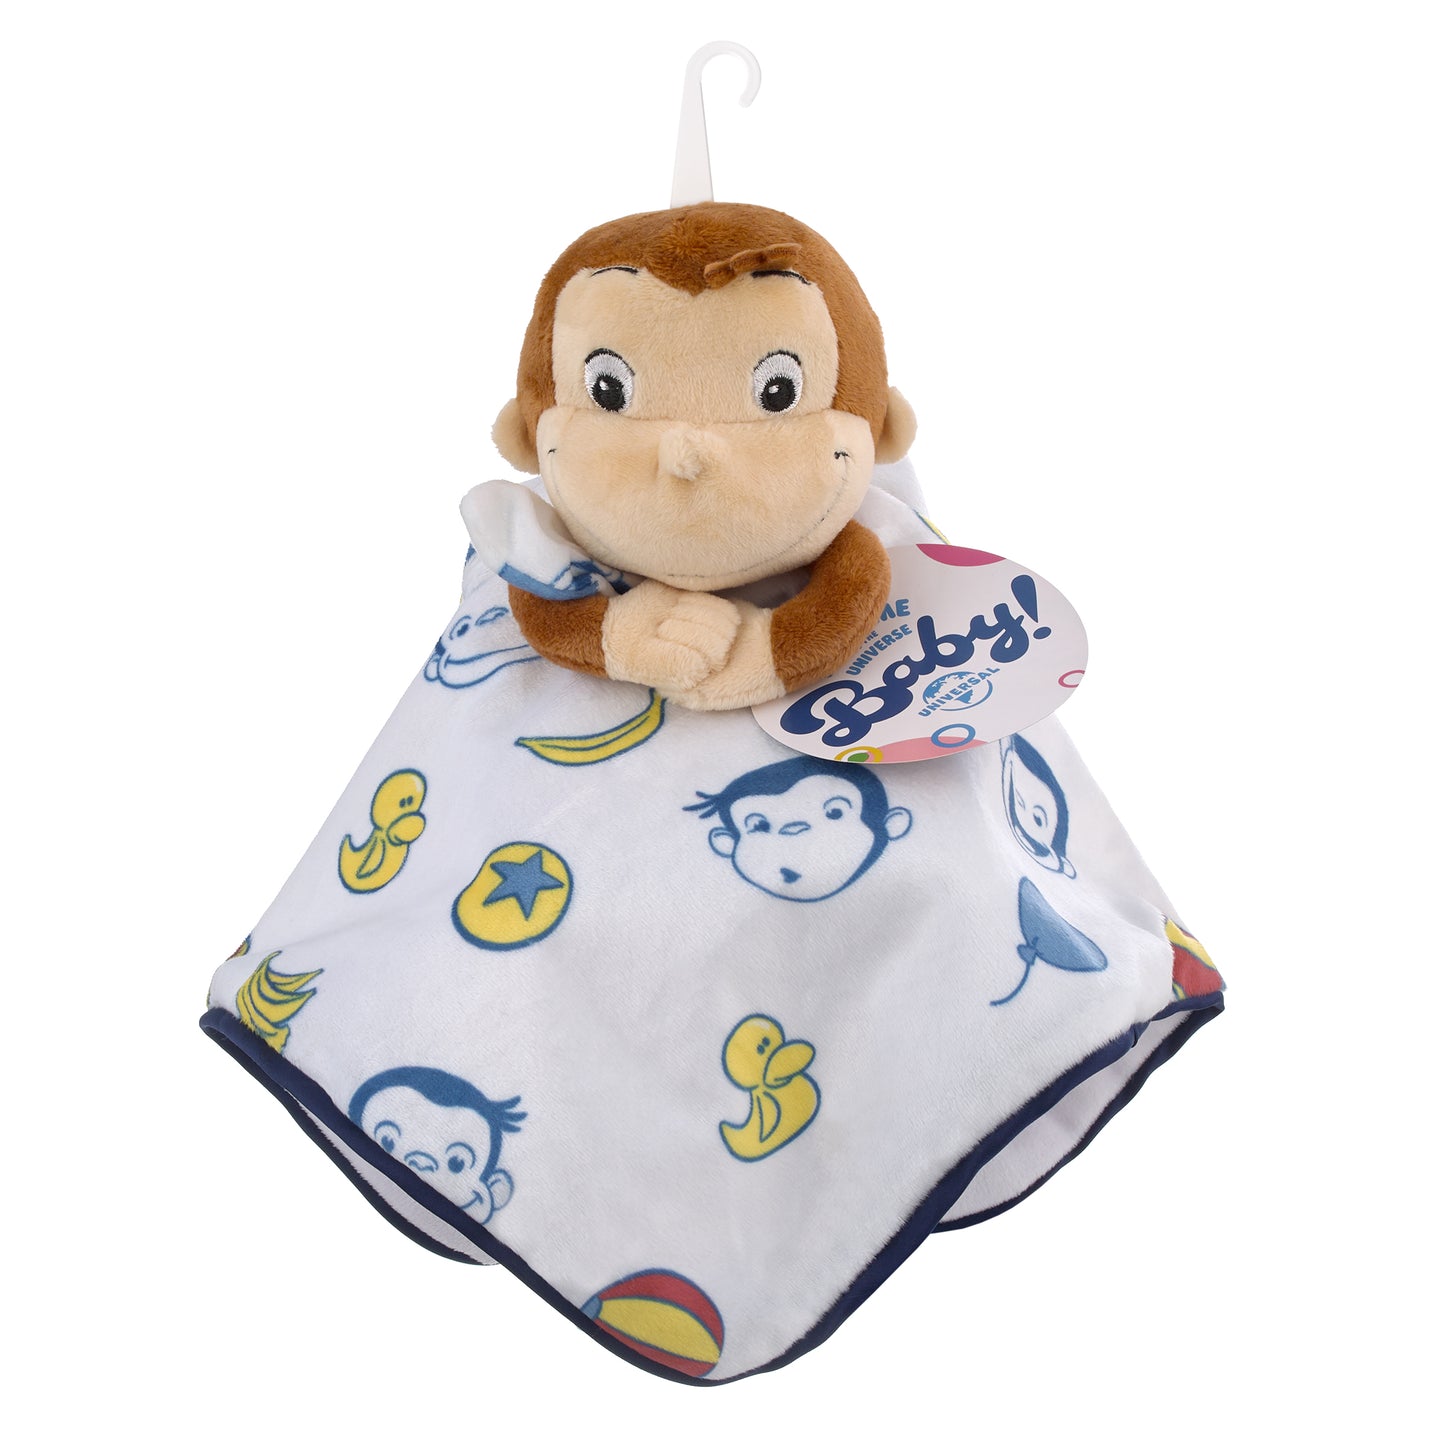 Welcome to the Universe Baby Curious George White, Blue, Red, Yellow and Brown Plush Security Baby Blanket